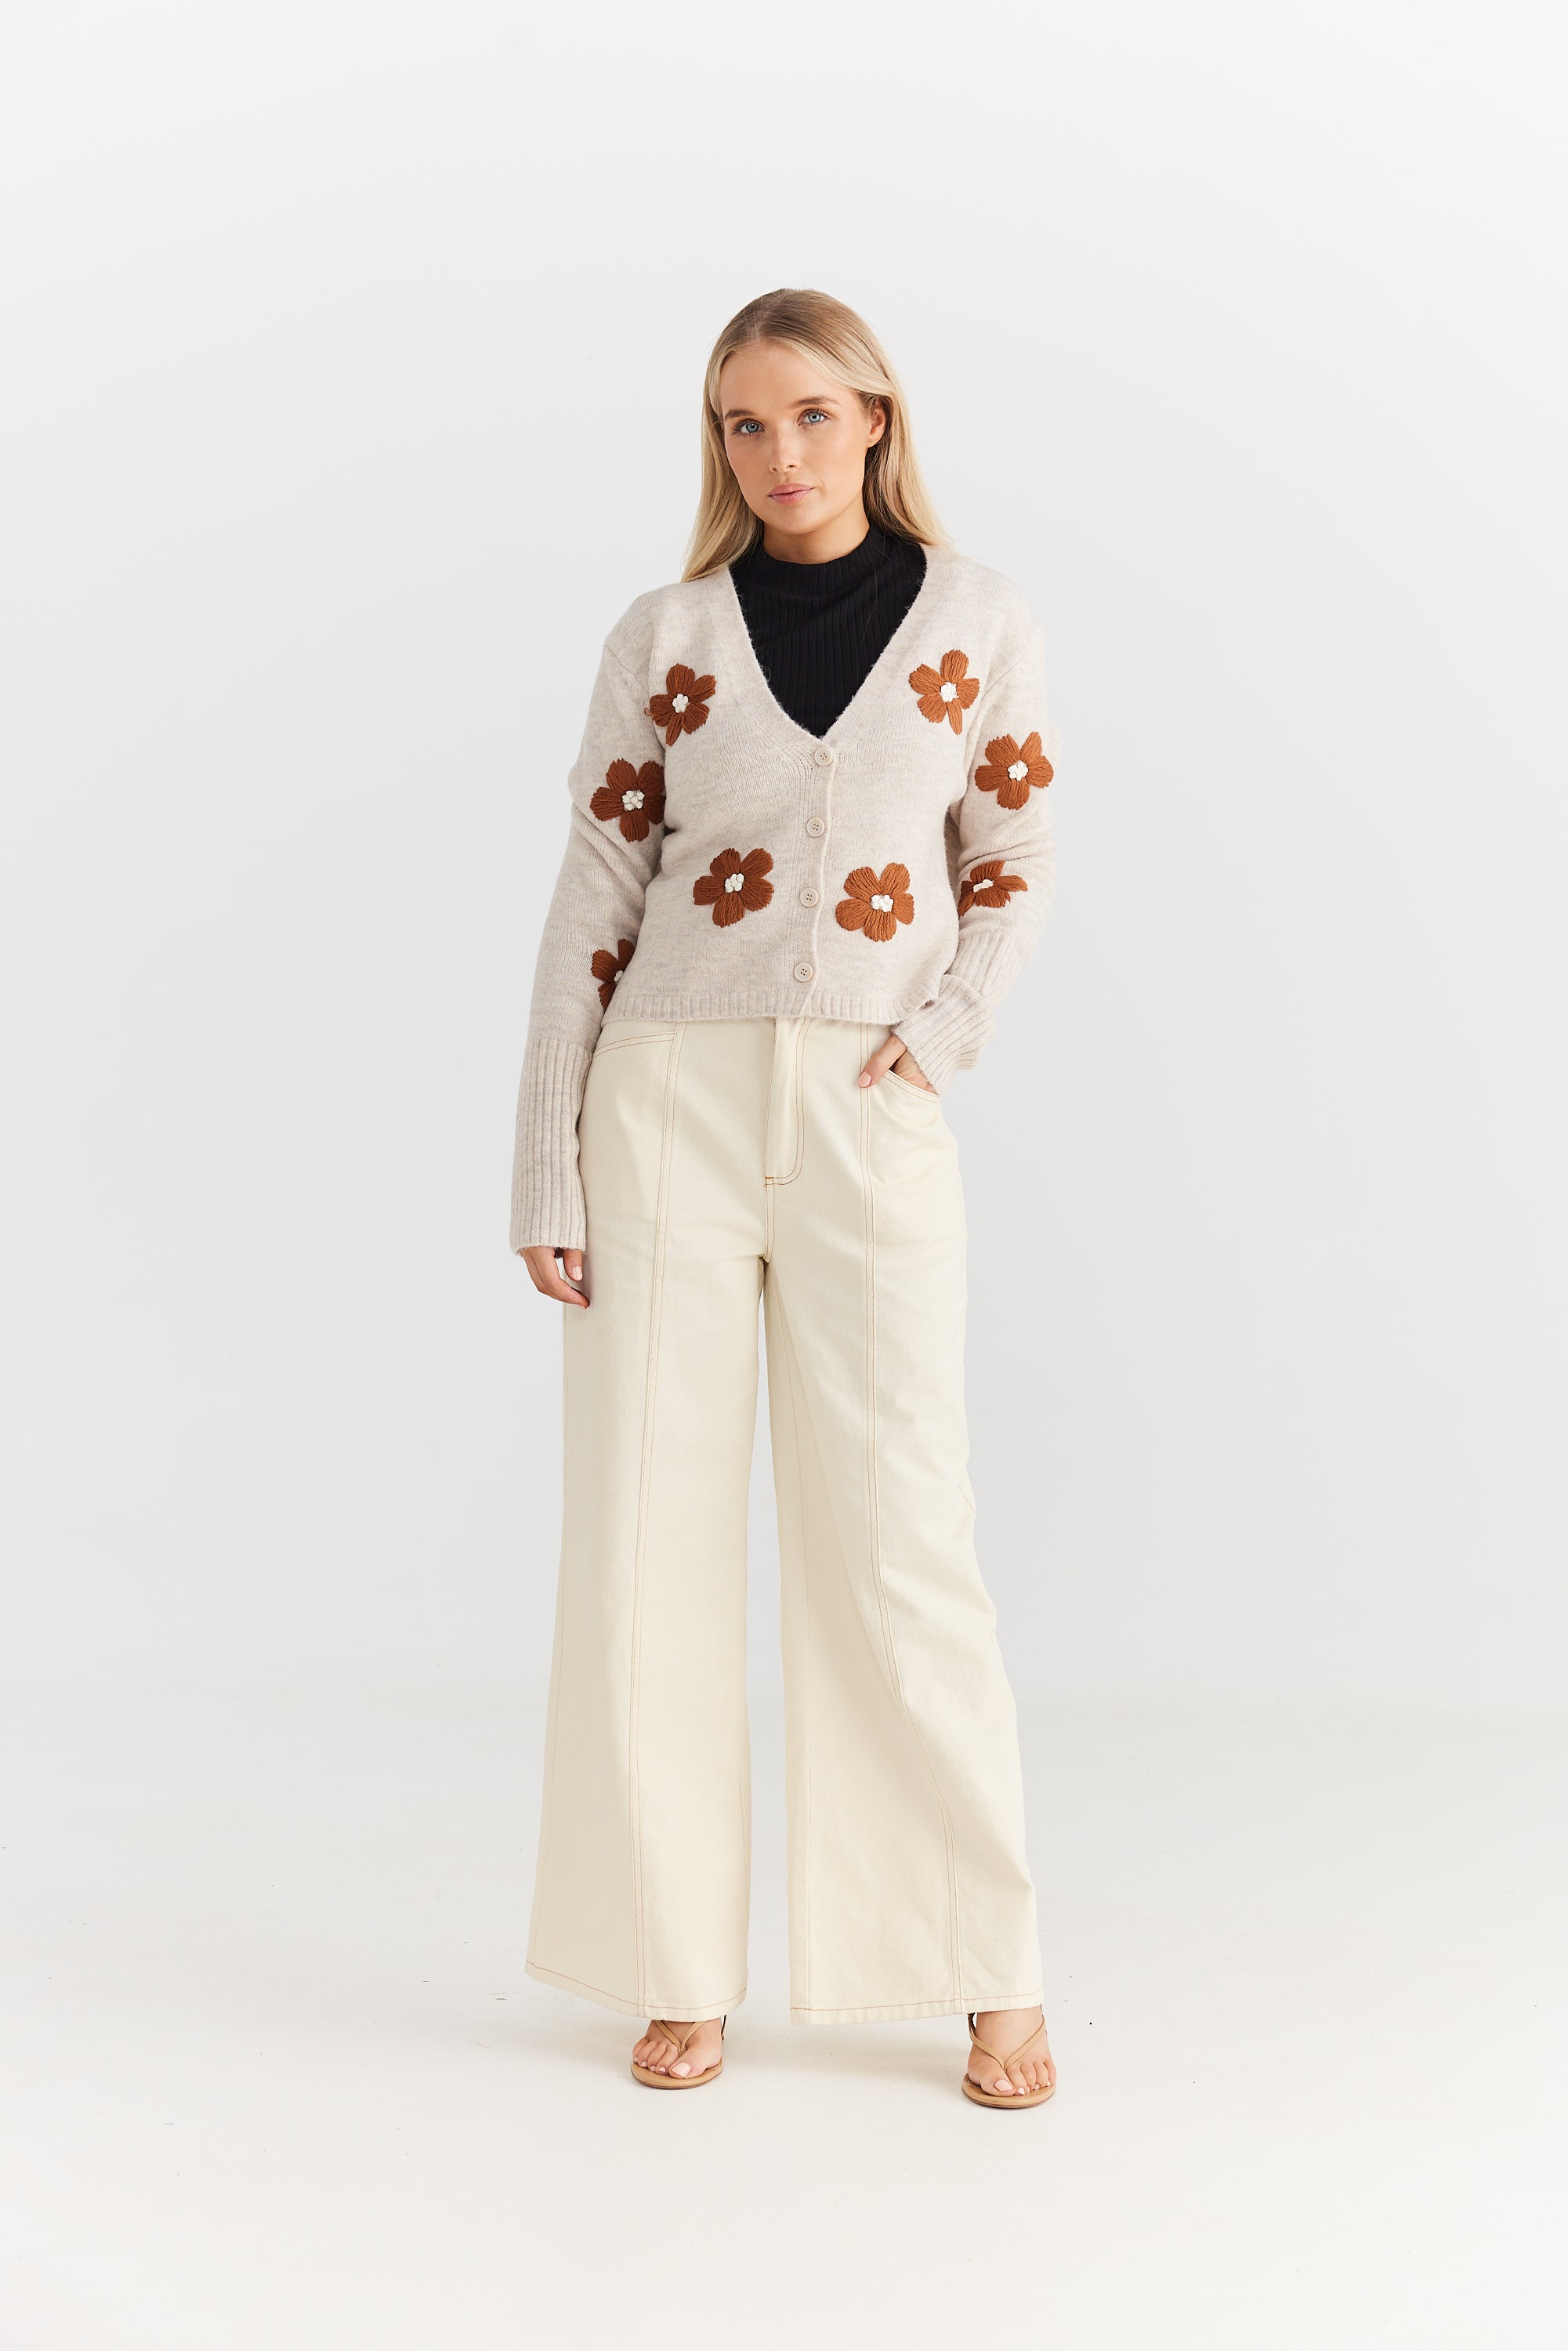 Bloom Cardigan - Snow-Knitwear & Jumpers-Daisy Says-The Bay Room